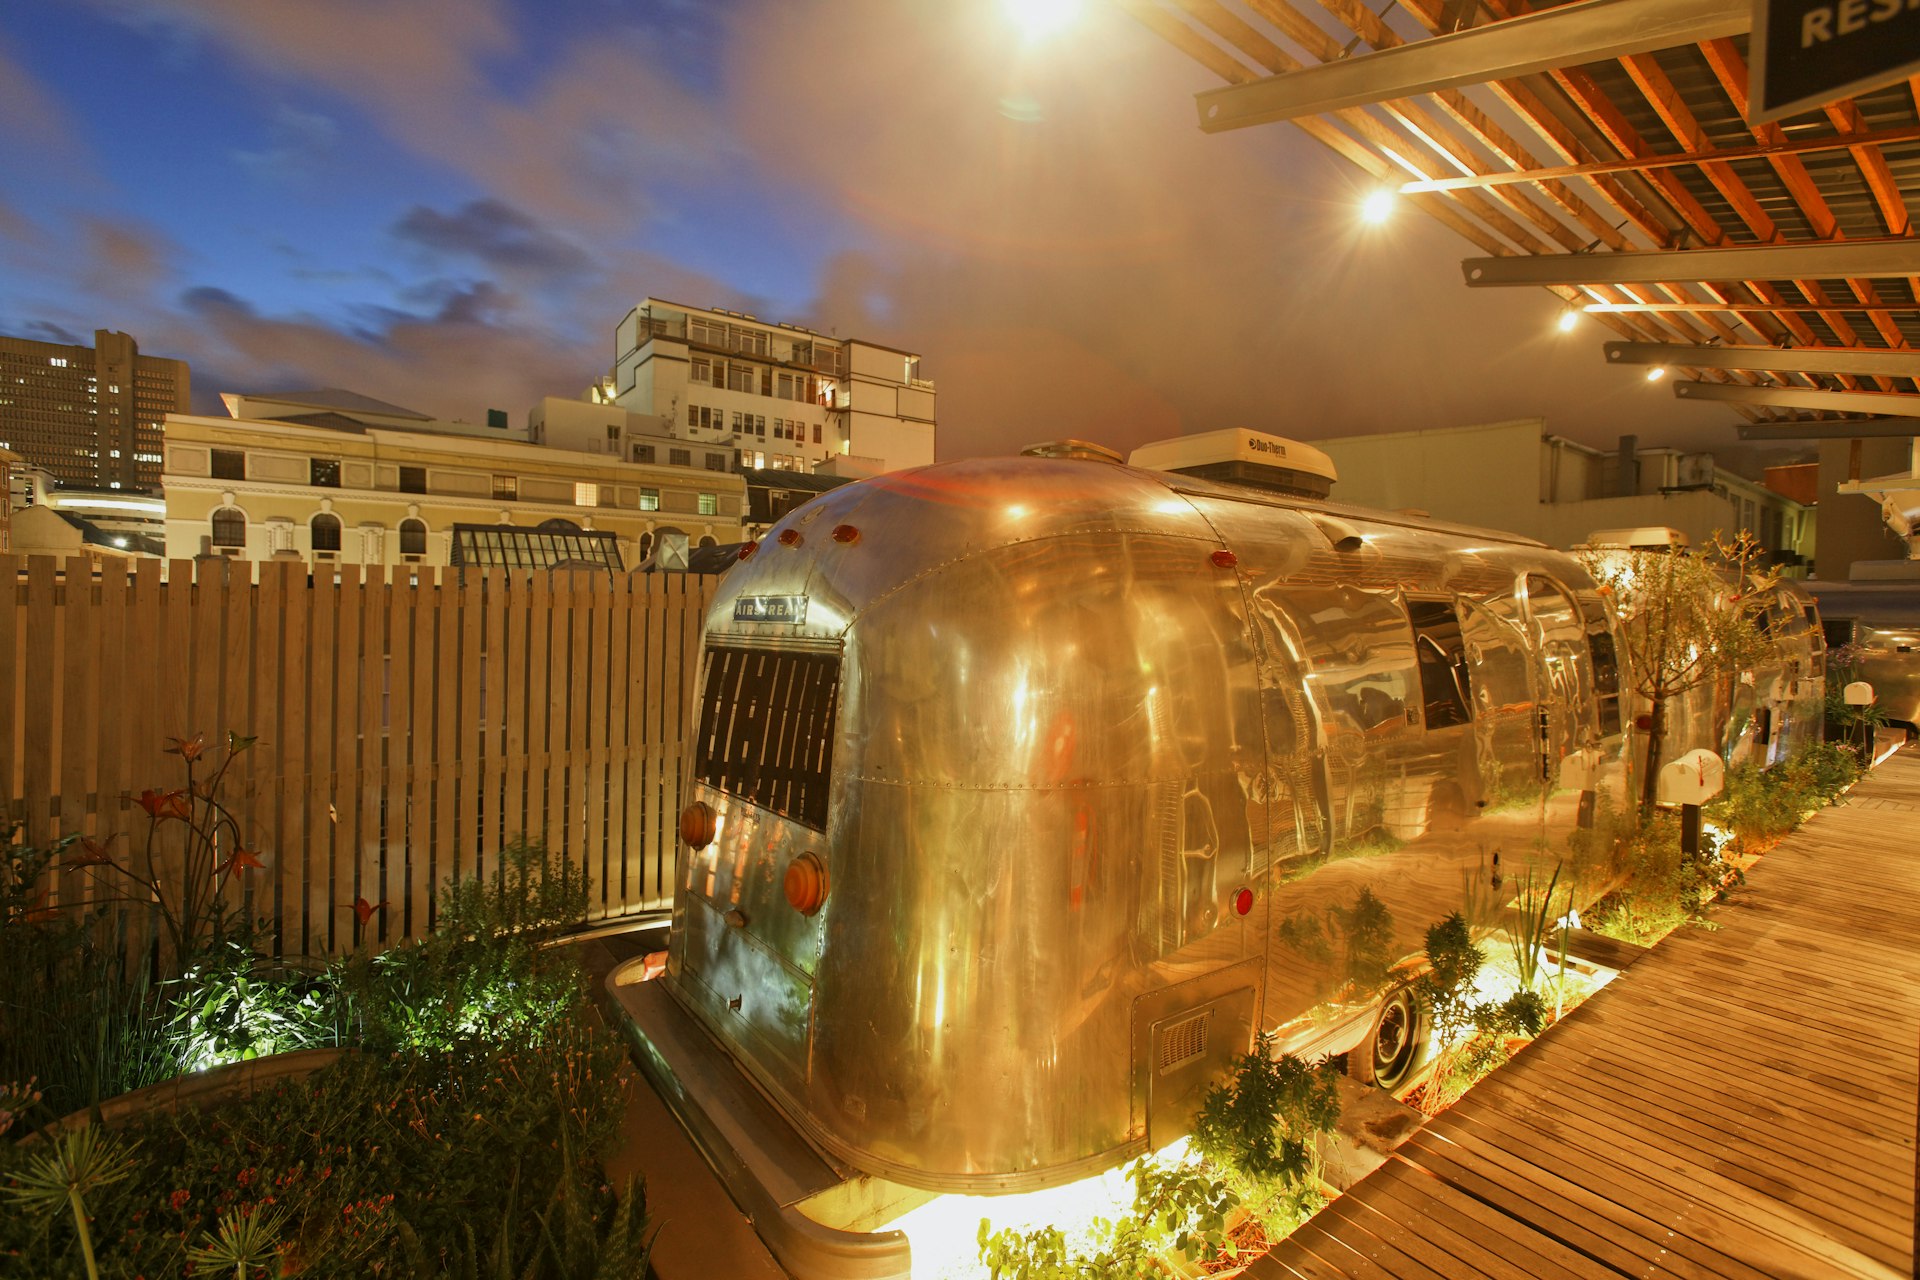 Gleaming silver Airstream trailers have a golden glow thanks to the warm wood fence, deck, and ceiling over the carefully manicured sites where they're parked at the Grand Daddy Hotel in Cape Town. Two trailers parked in a row have lights beaming up on them from the ground and shining down from the overhanging roof above. Behind them and the fence, white multi-story buildings hint at the surrounding neighborhood. 